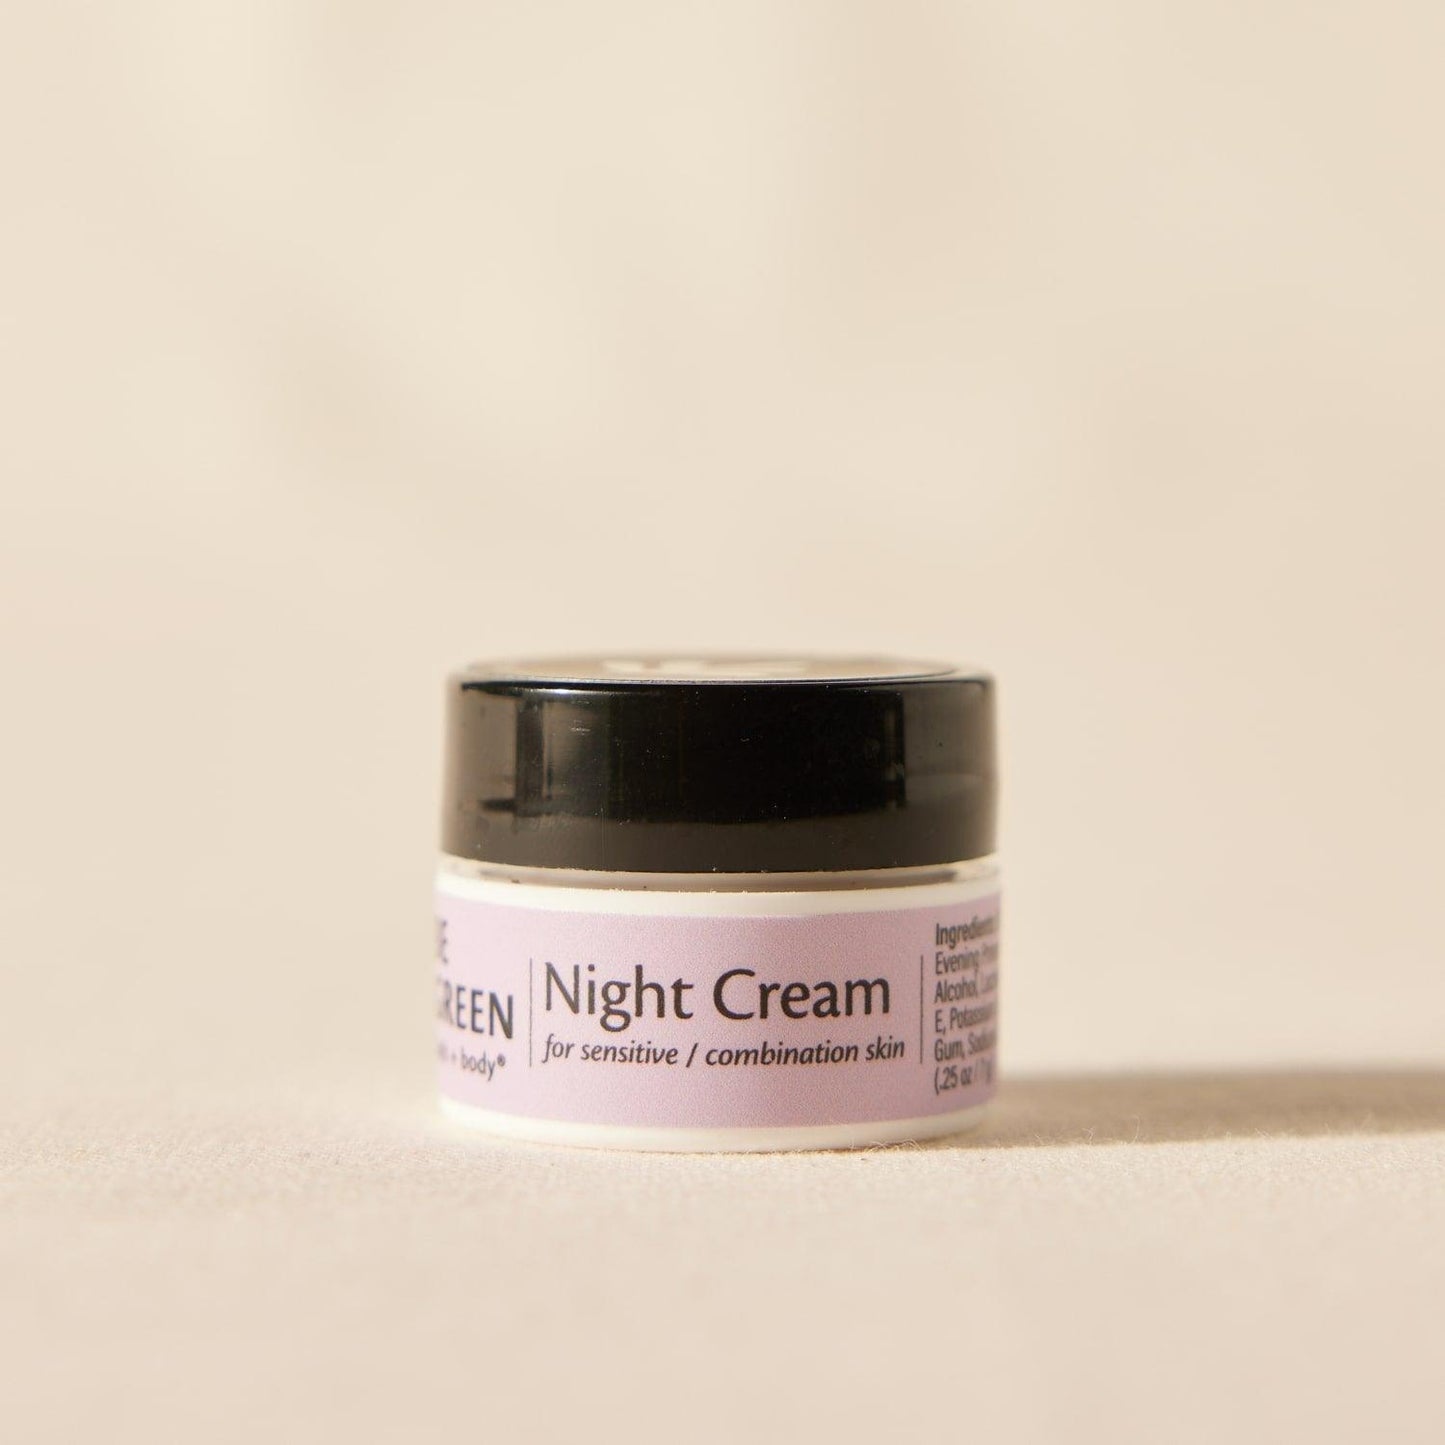 Trial size night cream for sensitive skin with organic ingredients